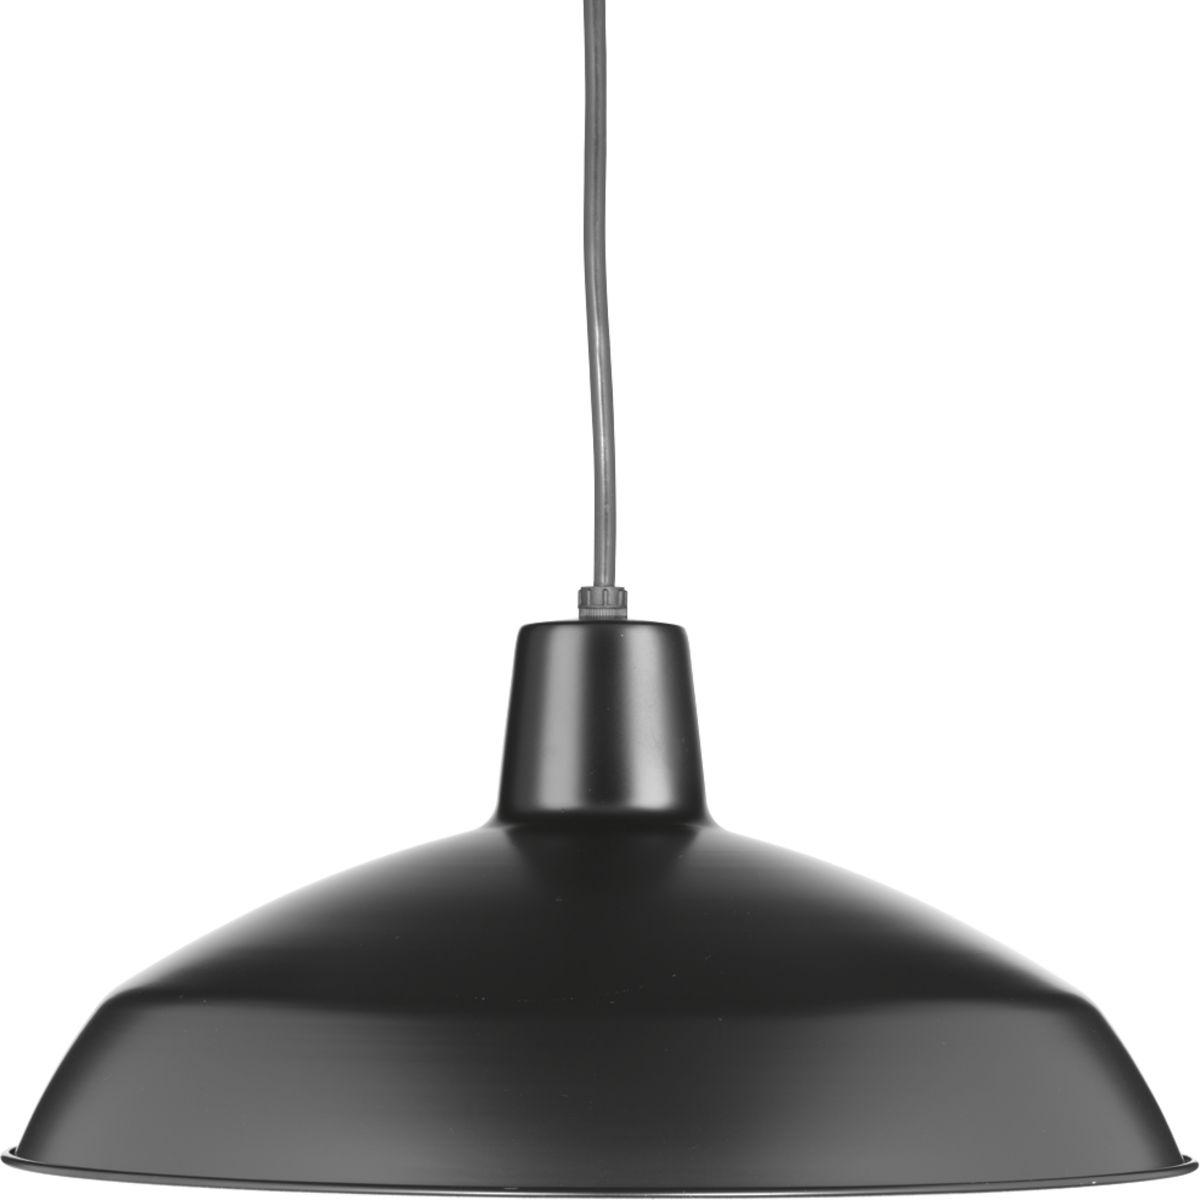 Hubbell P5094-31 One-light industrial style warehouse cord-hung pendant with spun metal shade. Gloss white inside shade for reflectivity. 3 Conductor SVT black cord. Black finish.  ; Black finish. ; Industrial inspired design. ; Spun metal shade.